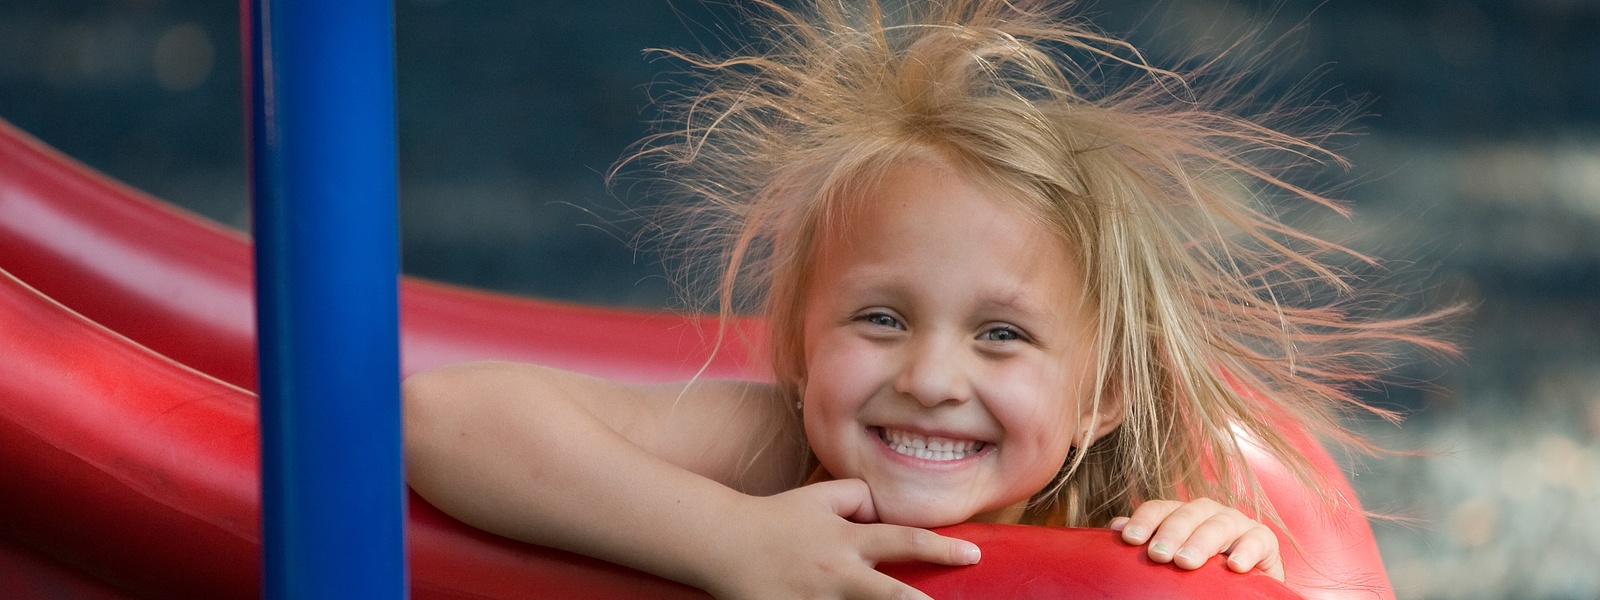 Static Electricity - the downside of colder weather